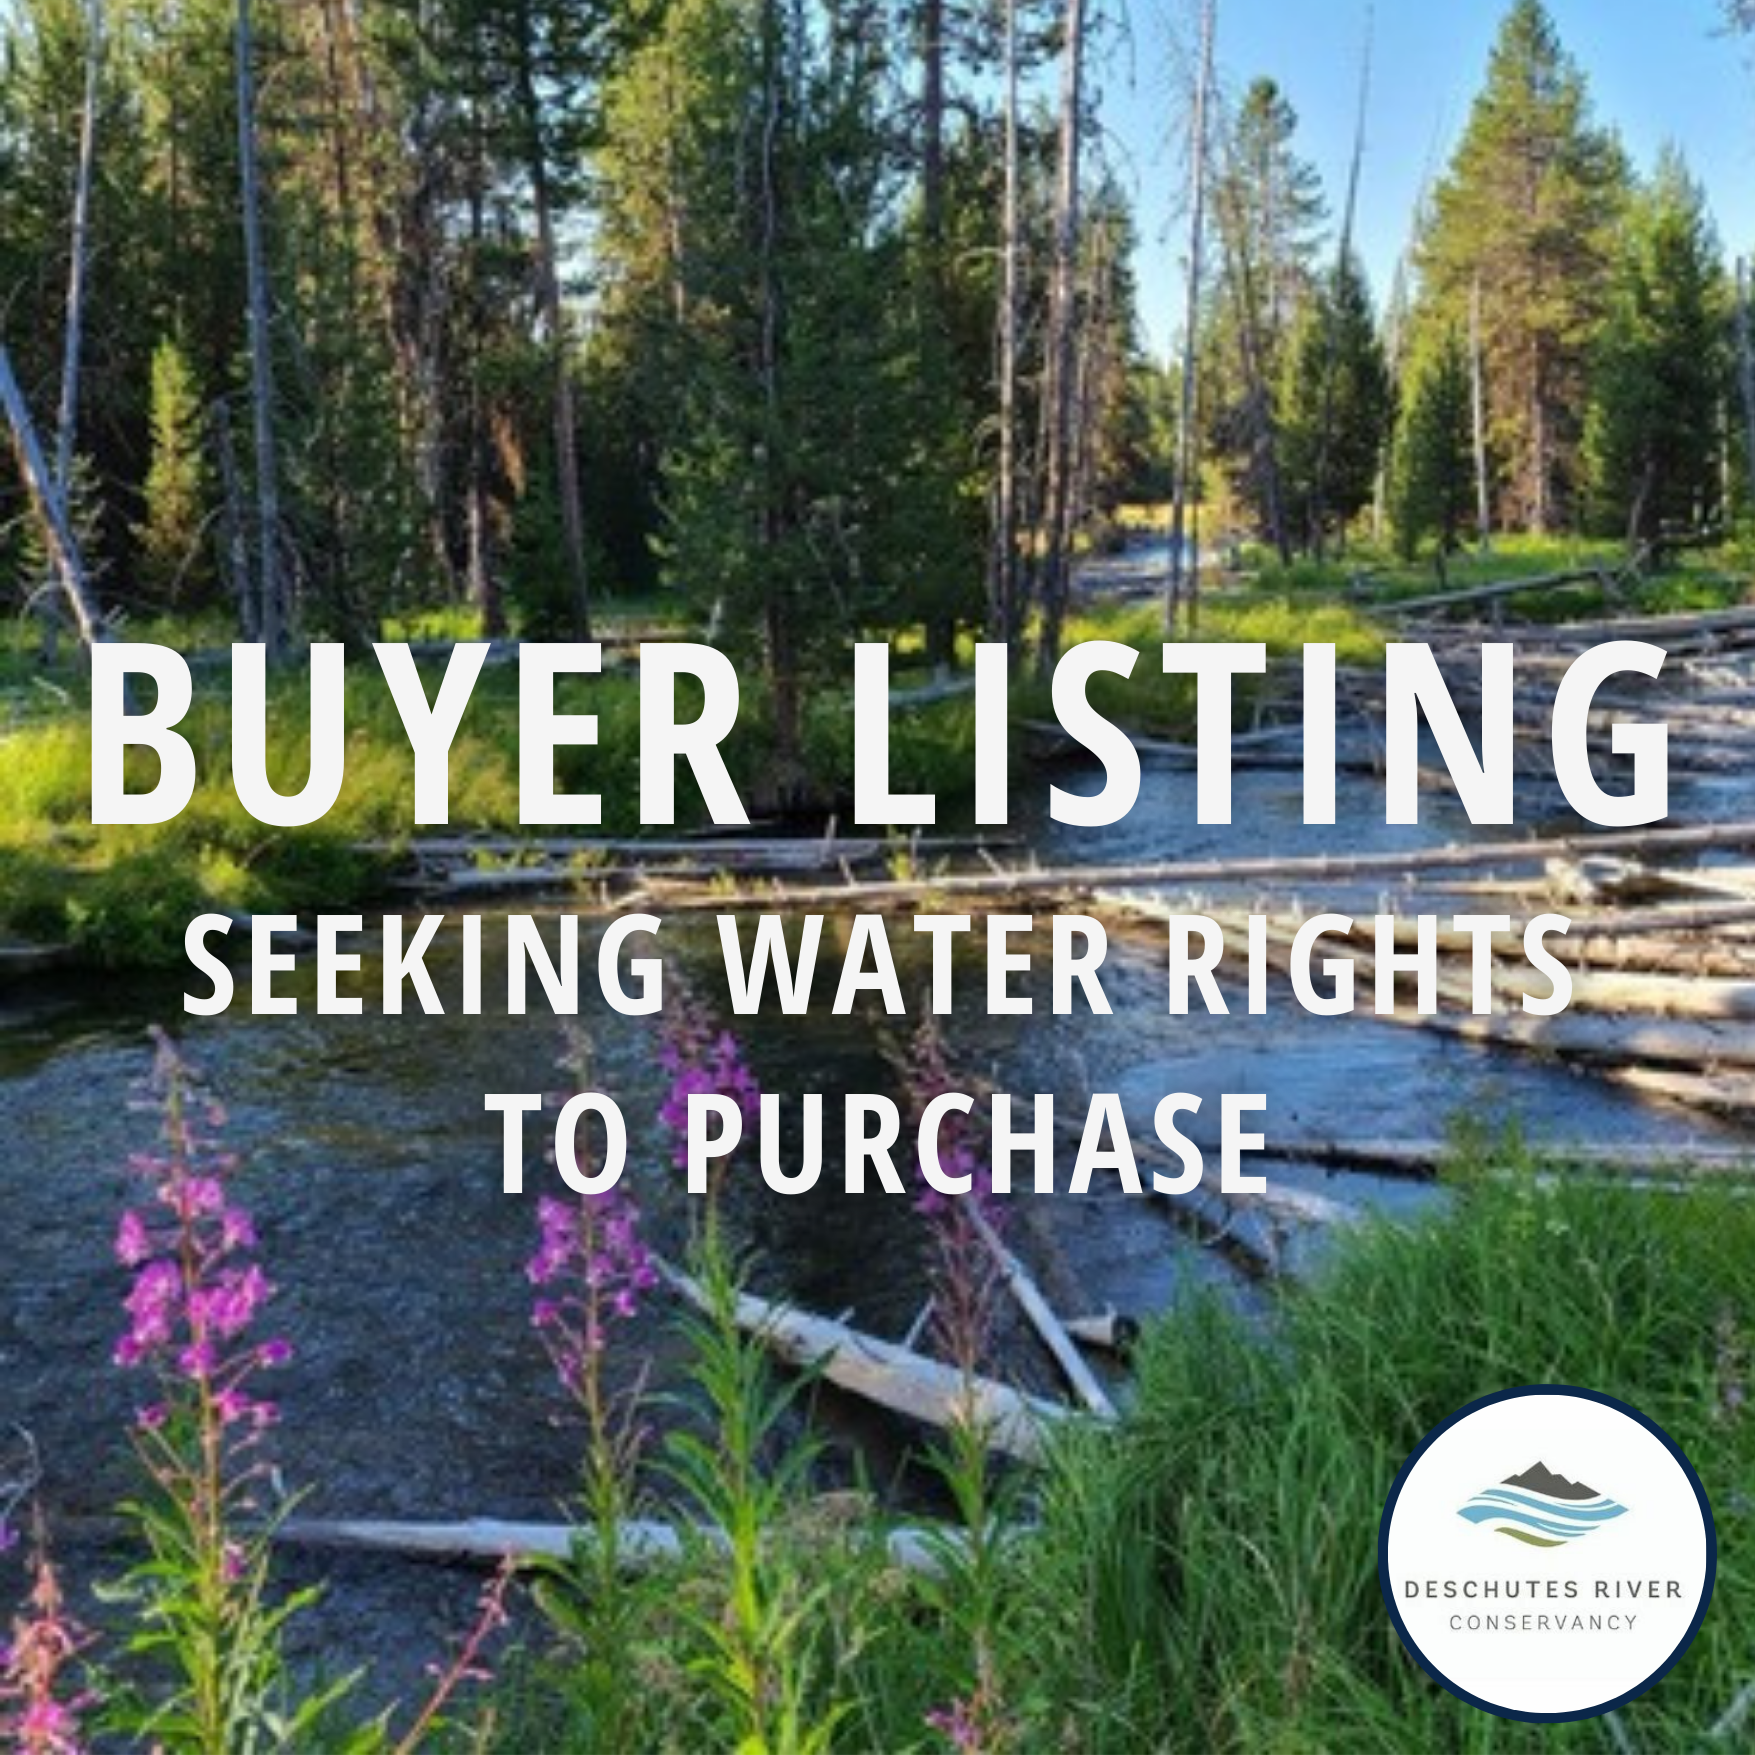 Seeking Water Rights to Purchase - Deschutes River Conservancy